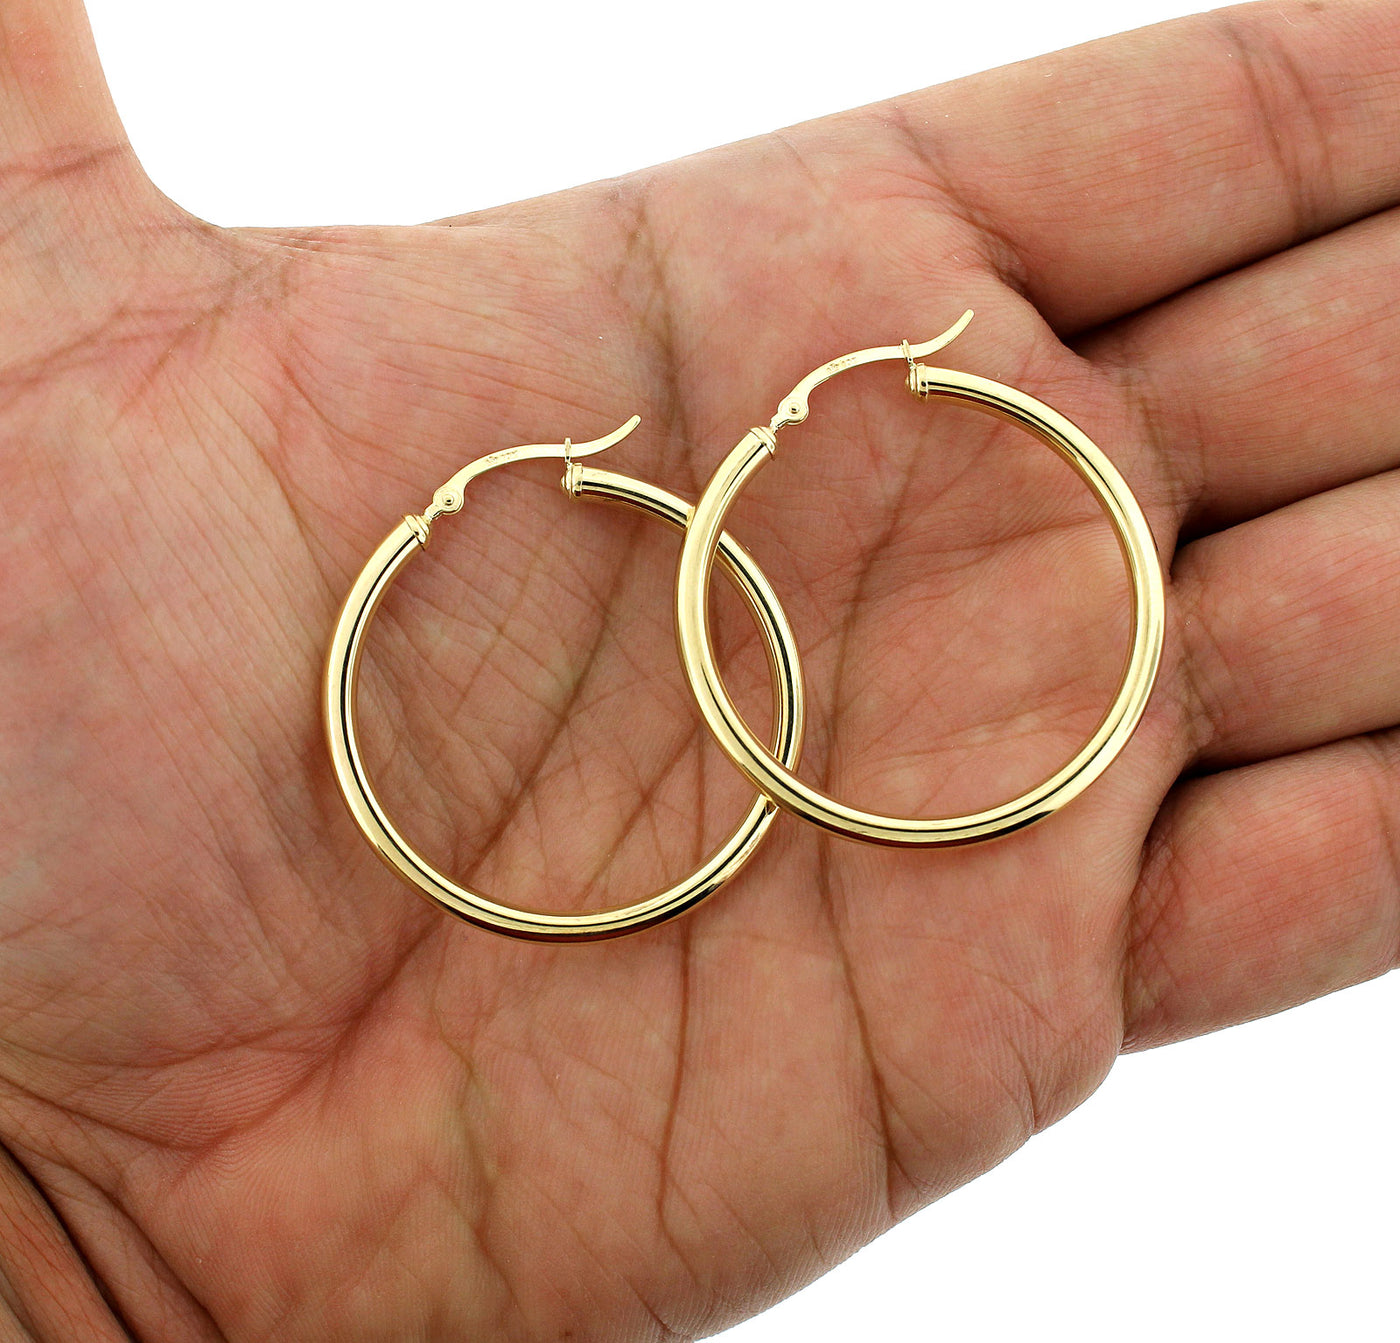 Real 10K Solid Yellow Gold 3mm X 38mm 1.5" Plain Shiny Round Tube Hoop Earrings